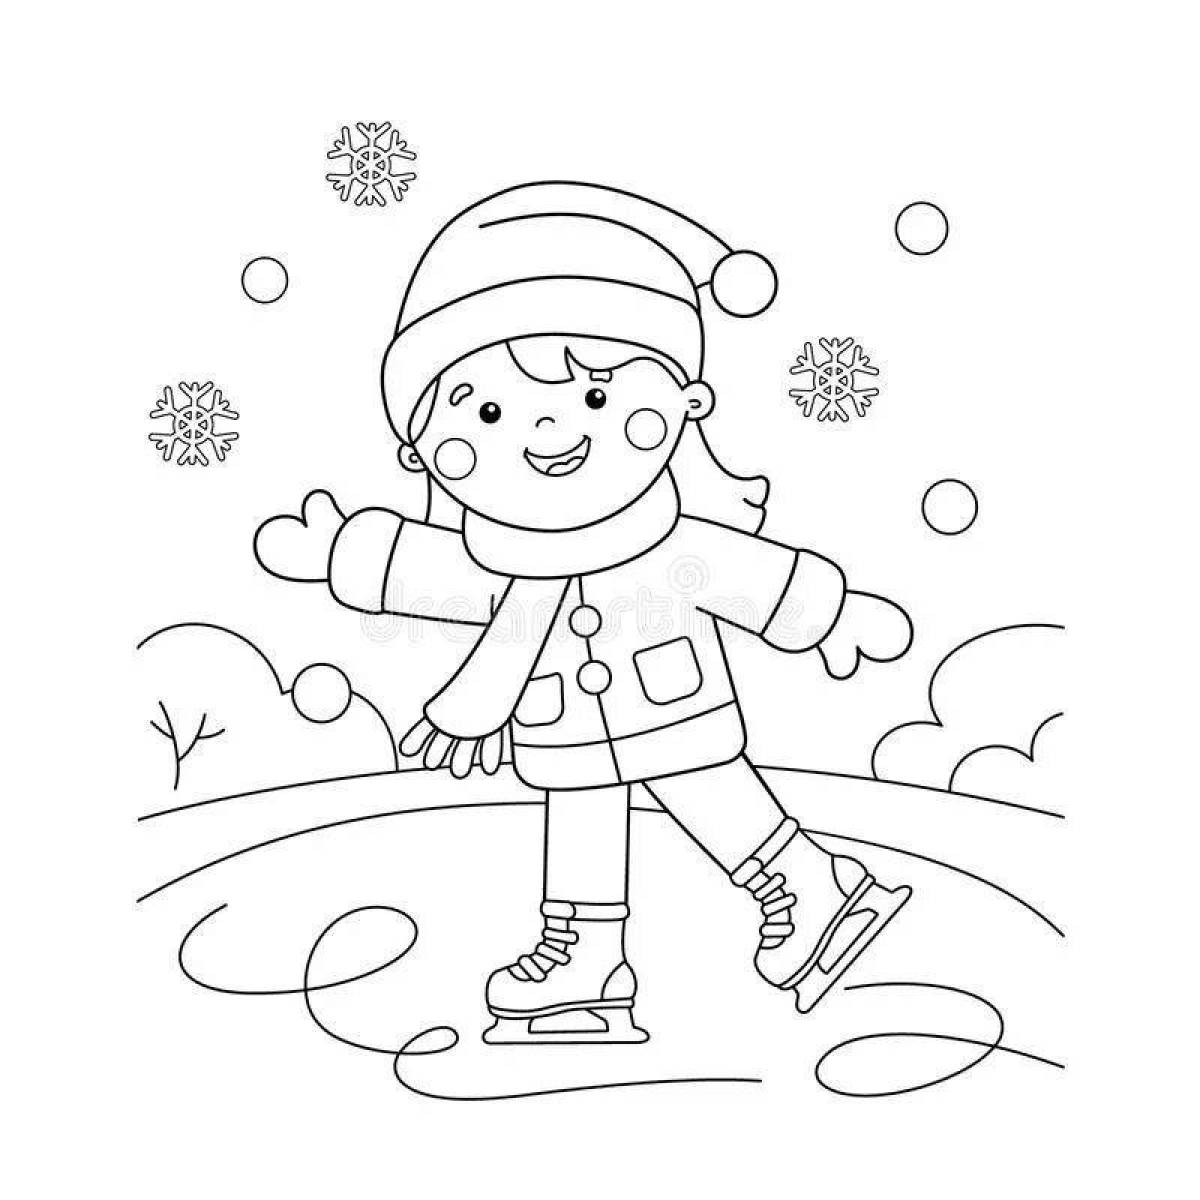 Fantastic winter sports coloring book for 4-5 year olds